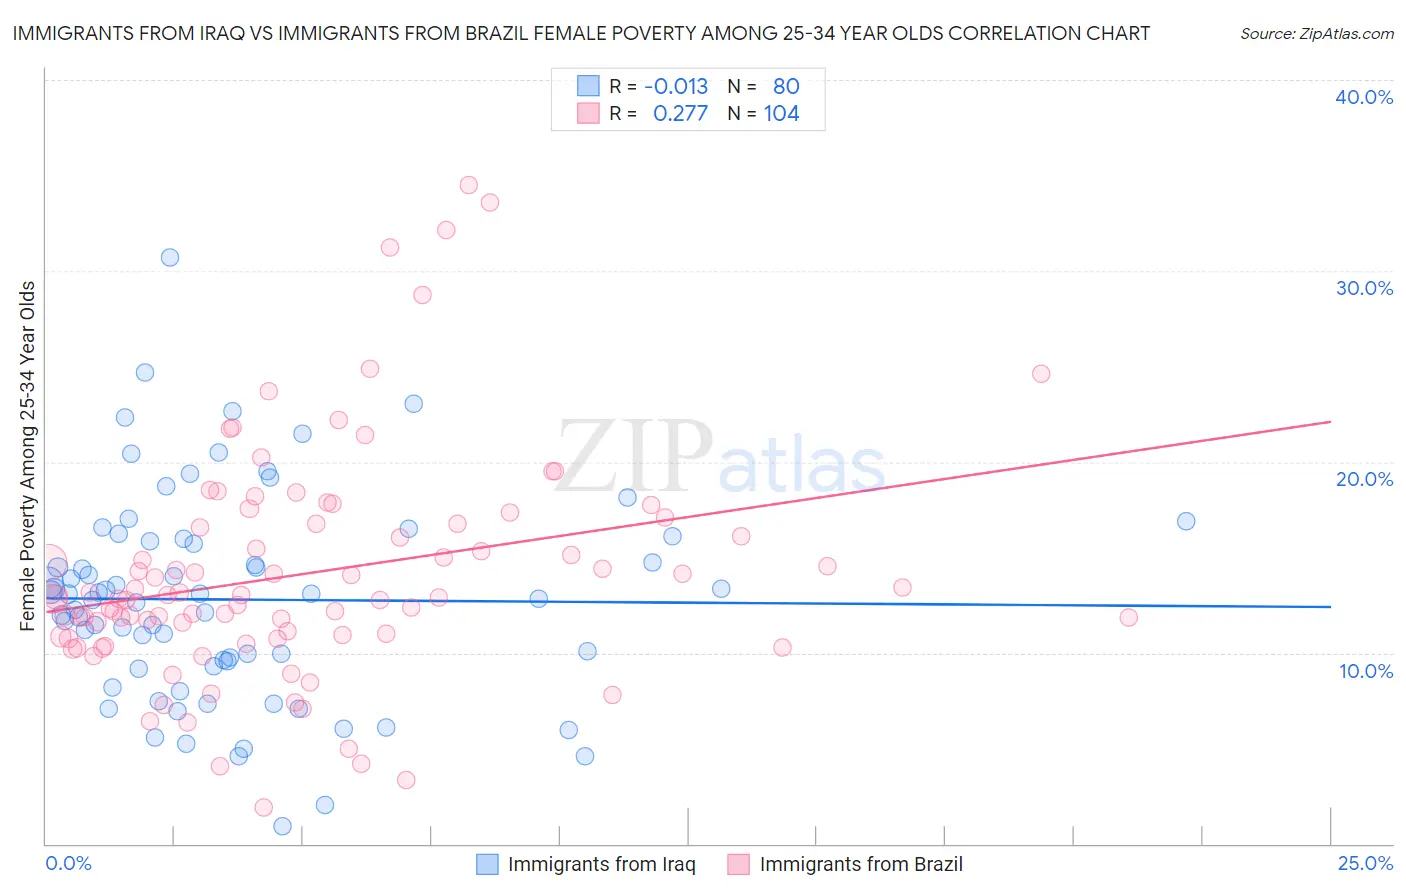 Immigrants from Iraq vs Immigrants from Brazil Female Poverty Among 25-34 Year Olds